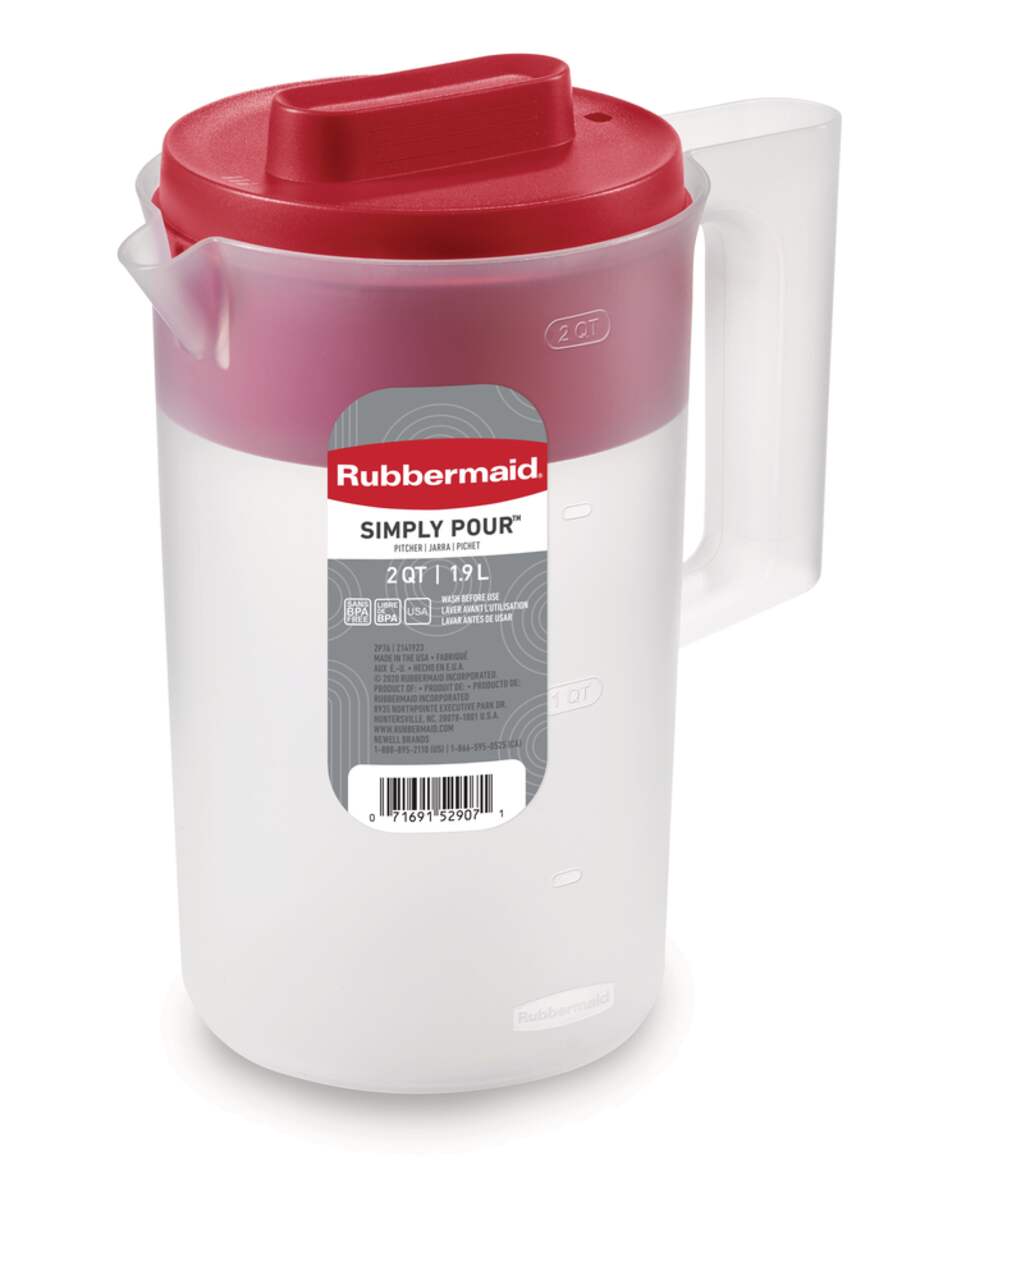 https://media-www.canadiantire.ca/product/living/kitchen/food-storage/0421619/rubbermaid-servin-saver-1-89l-juice-pitcher-f409d721-a29c-4526-92b8-619874fd0a65.png?imdensity=1&imwidth=640&impolicy=mZoom